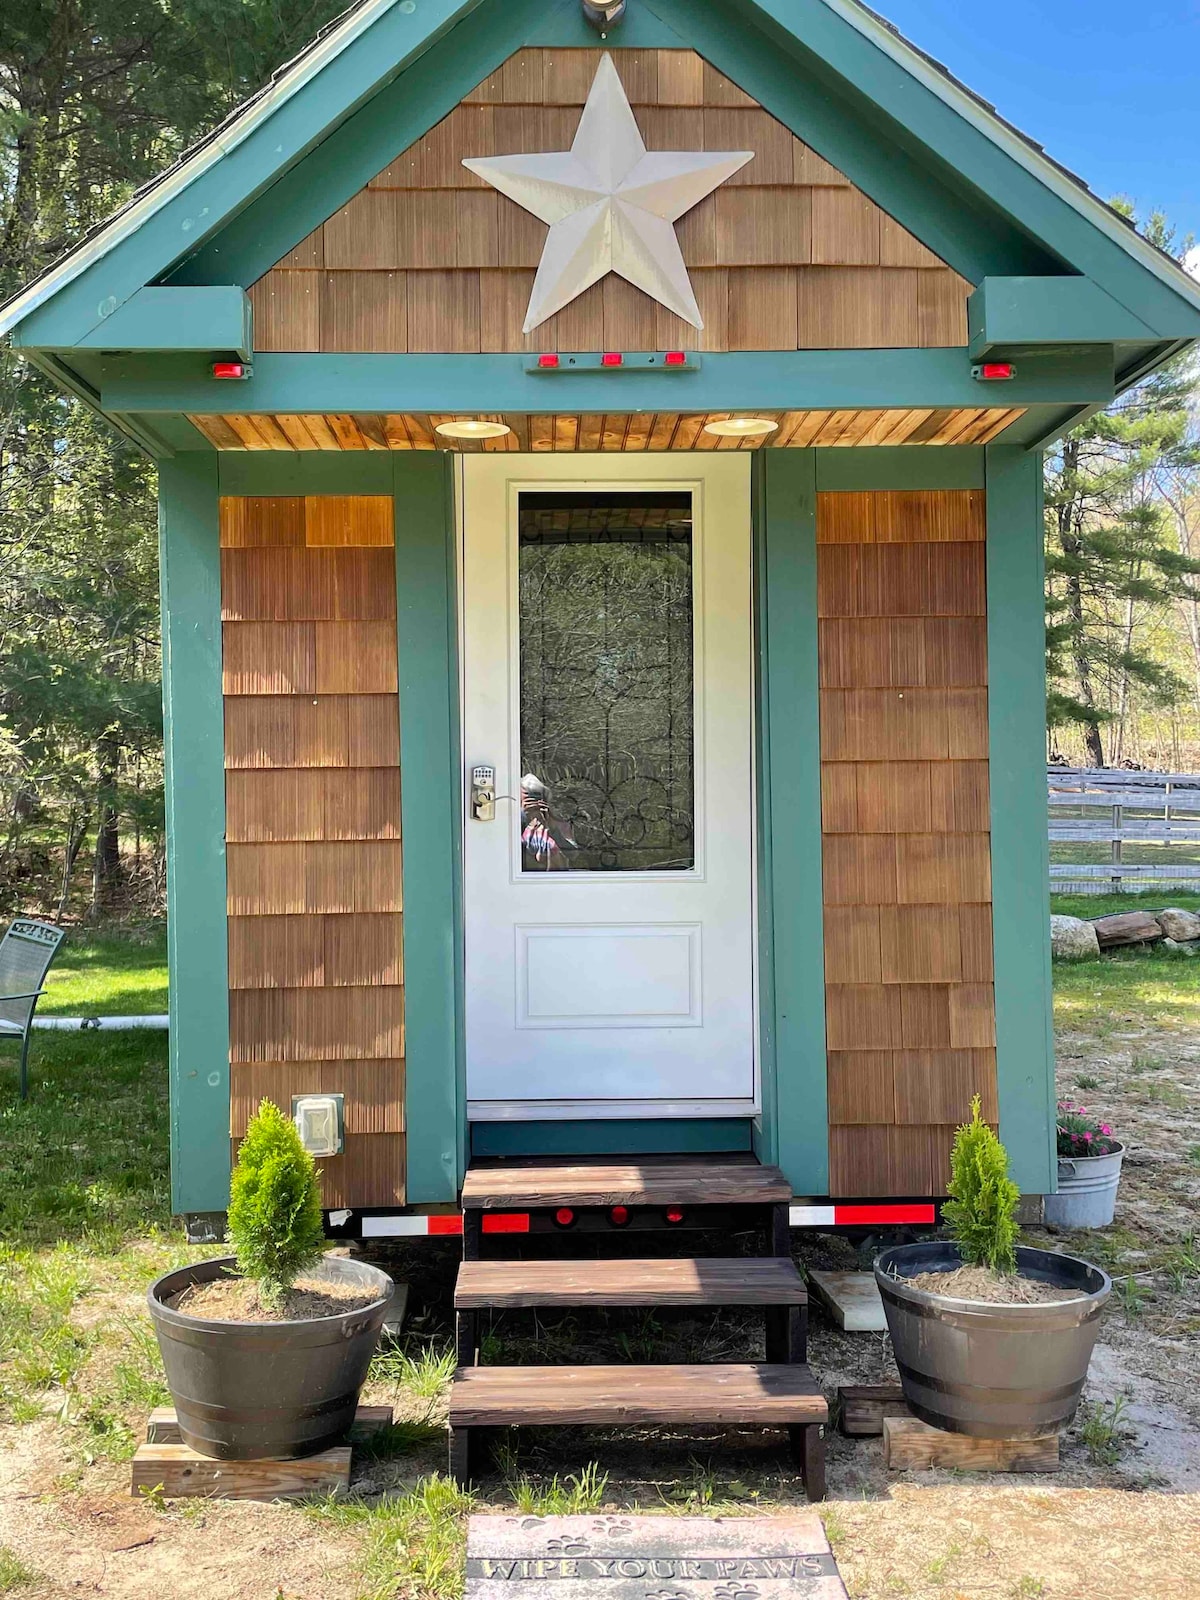 Unwind to simpler times in a tiny home on a farm